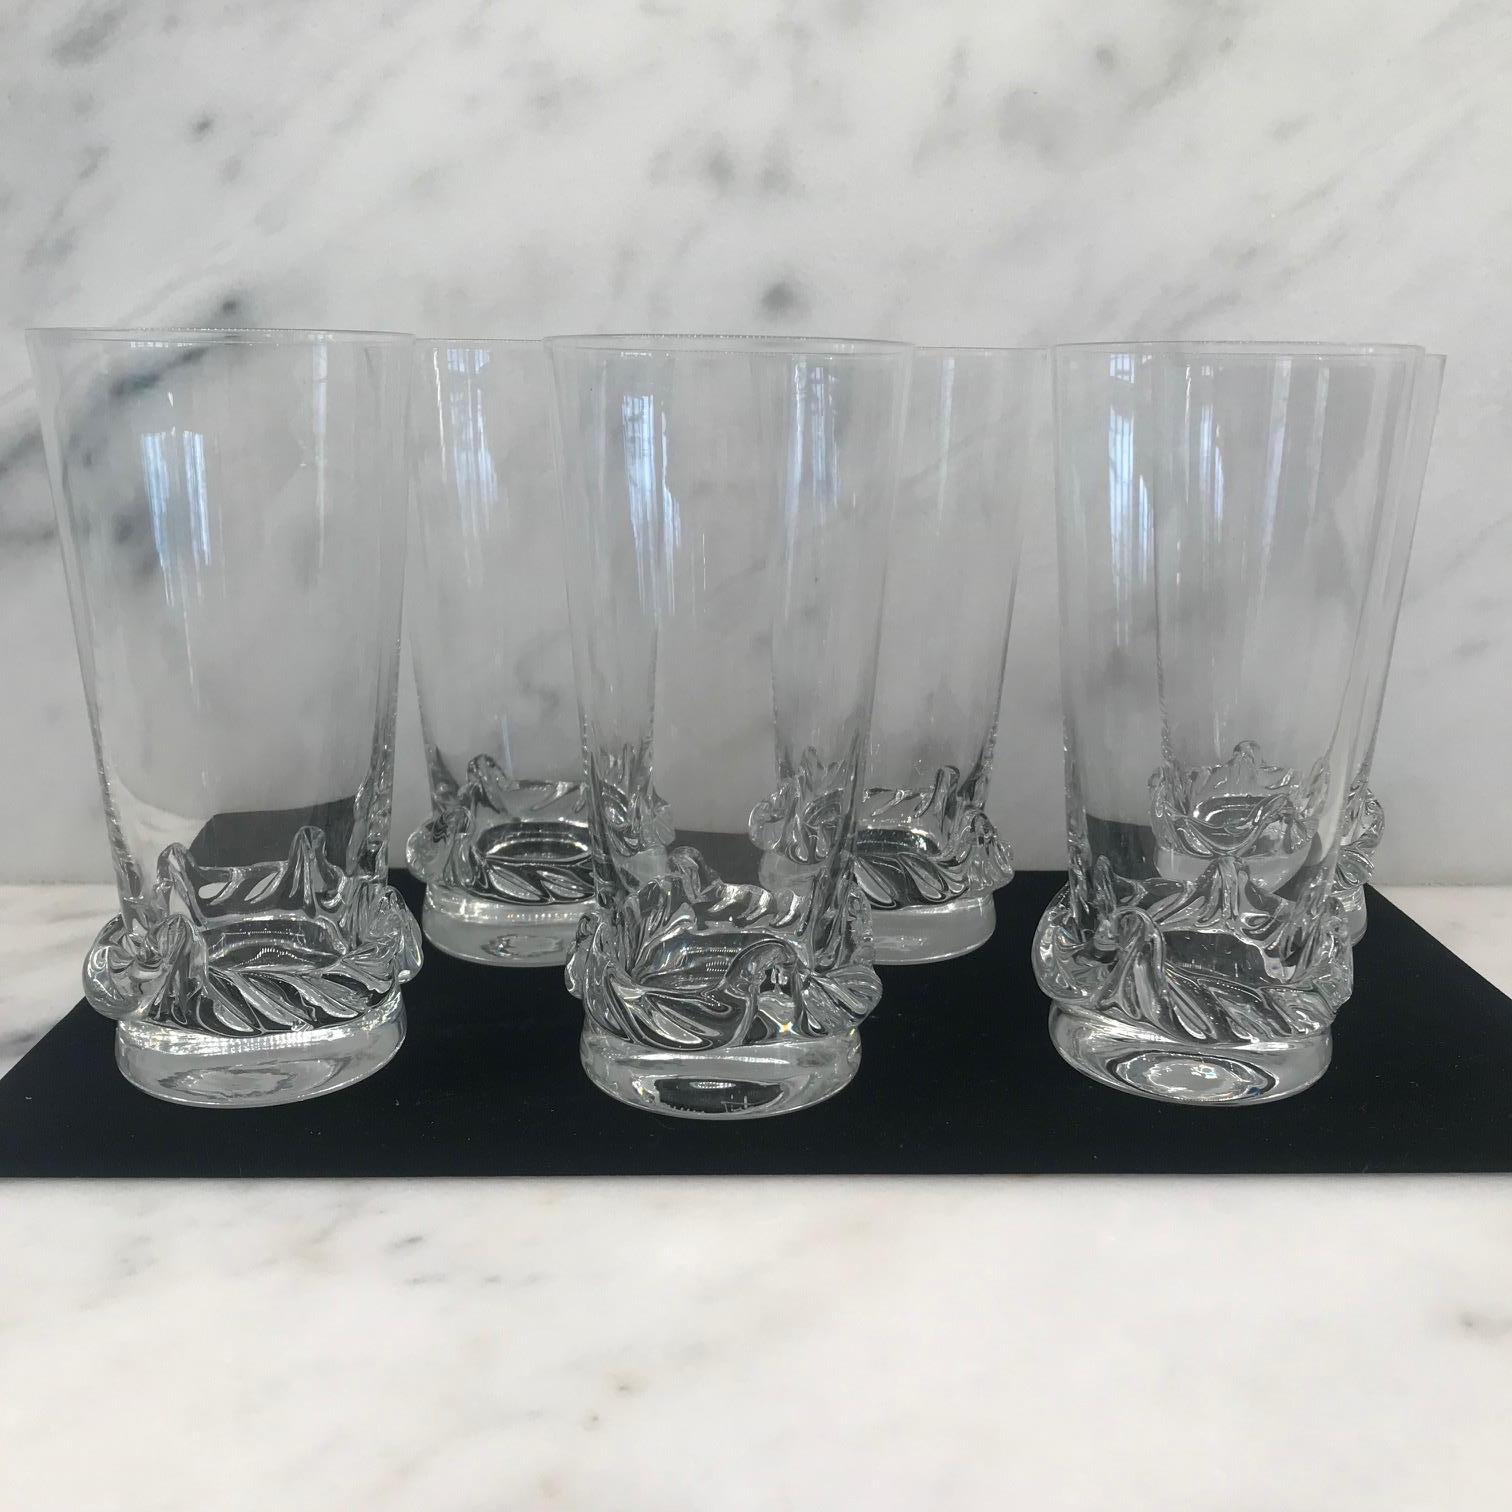 A sculptural clear art glass set of 6 glasses made by Daum, one of the most famous French glass makers of the period circa 1950. With its timeless form and clean modernist lines, these glasses blend seamlessly with any style of interior from